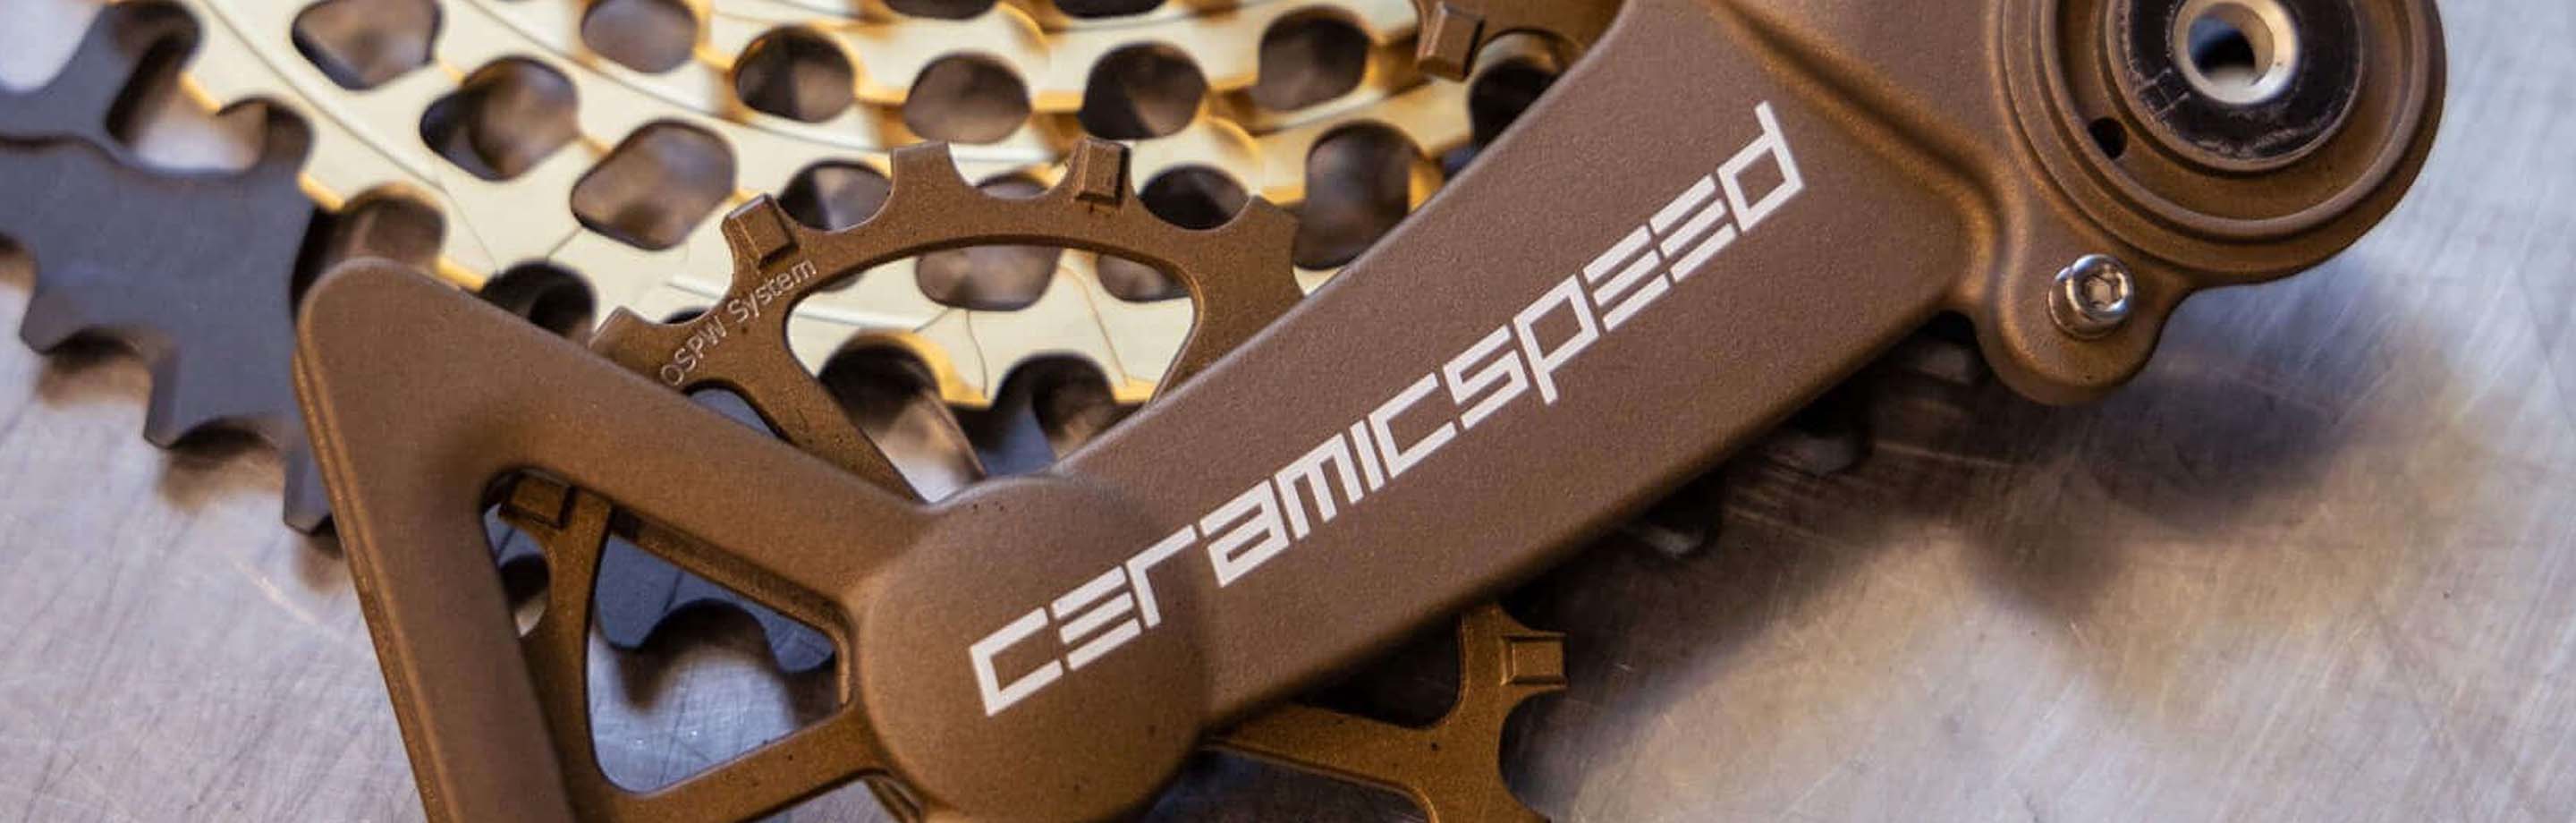 CeramicSpeed – Ceramic bearings, chains and grease for your race bike